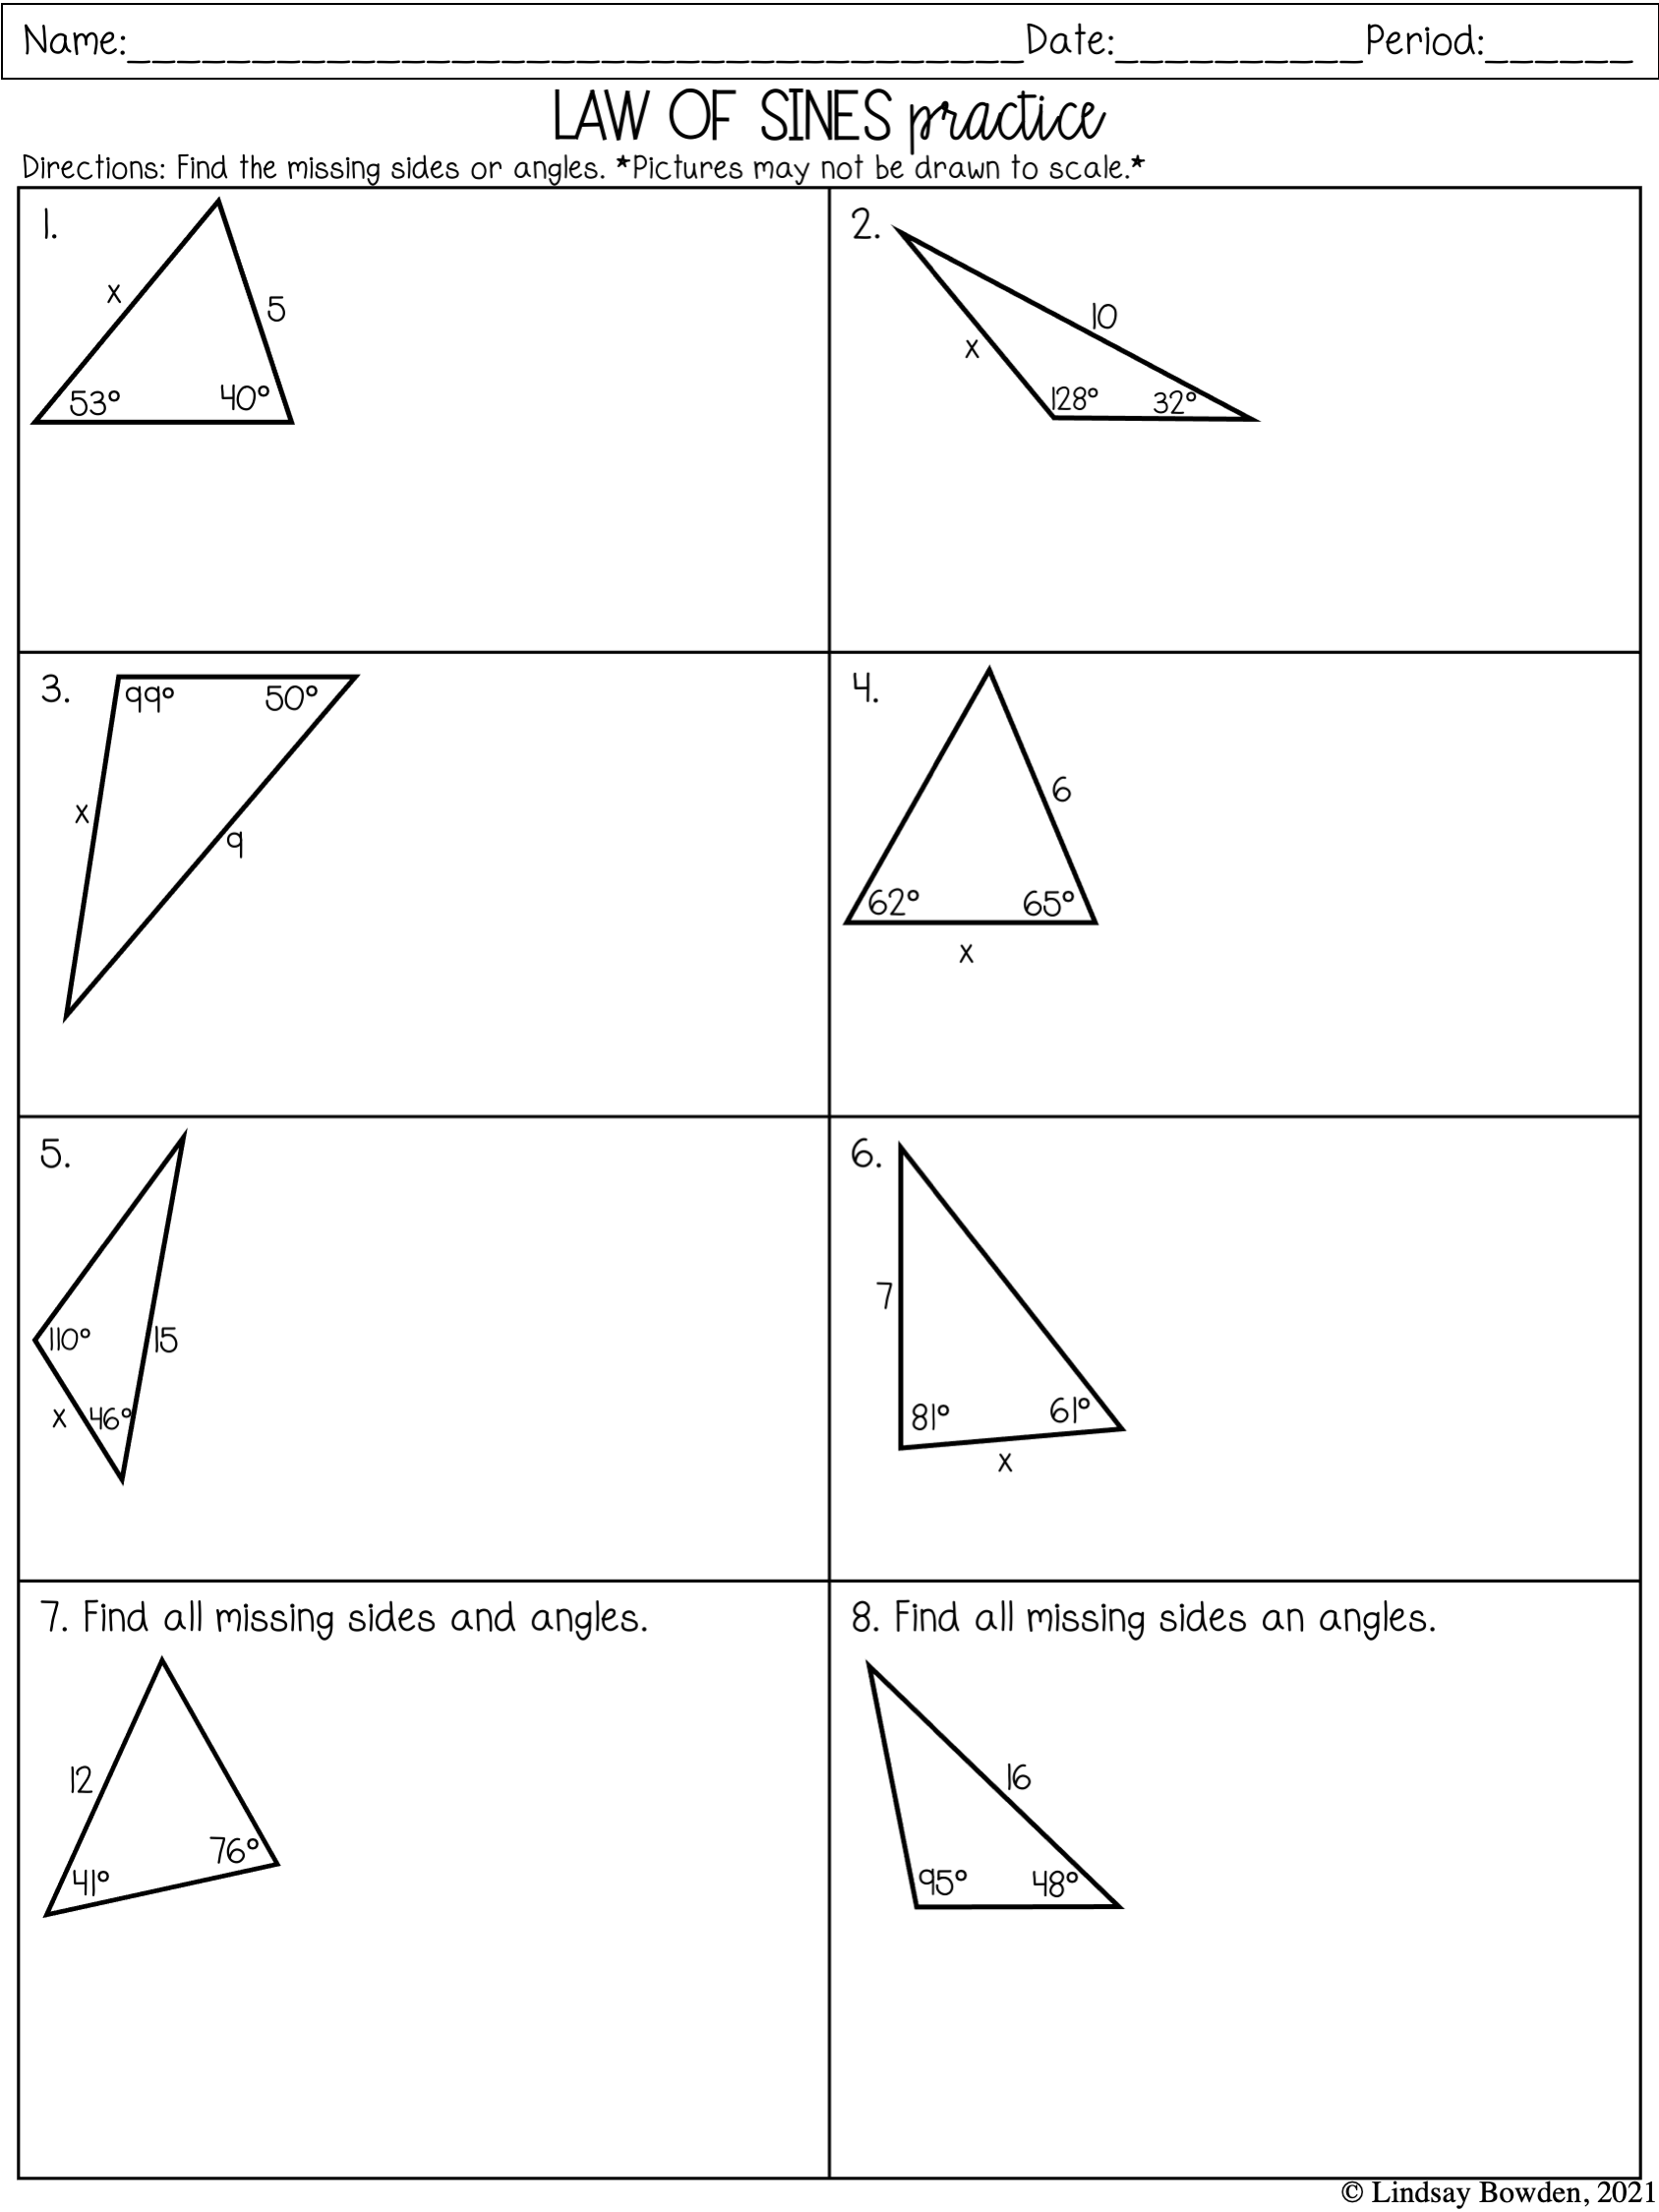 Law of Sines and Cosines Notes and Worksheets - Lindsay Bowden Regarding Law Of Cosines Worksheet